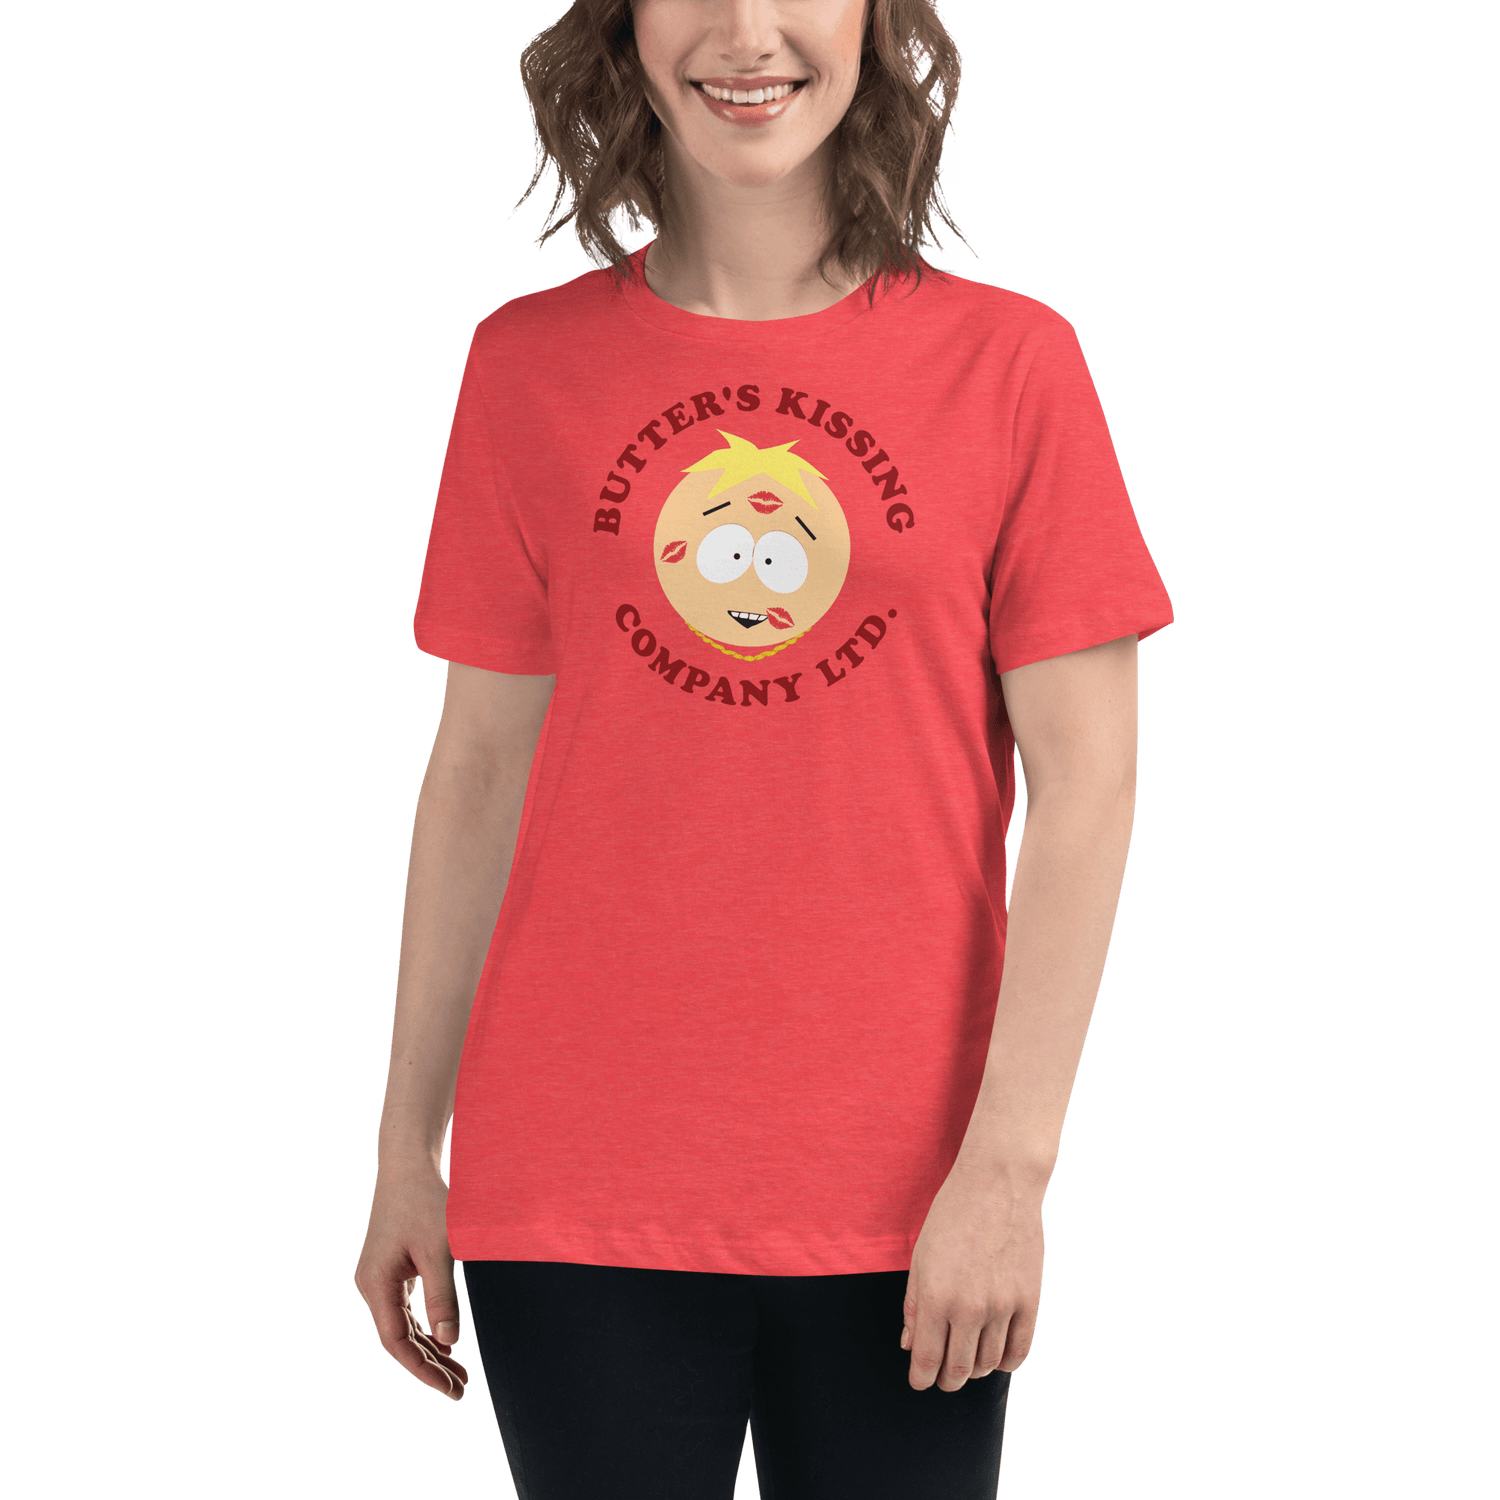 South Park Butter's Kissing Company Womens Short Sleeve T - Shirt - Paramount Shop